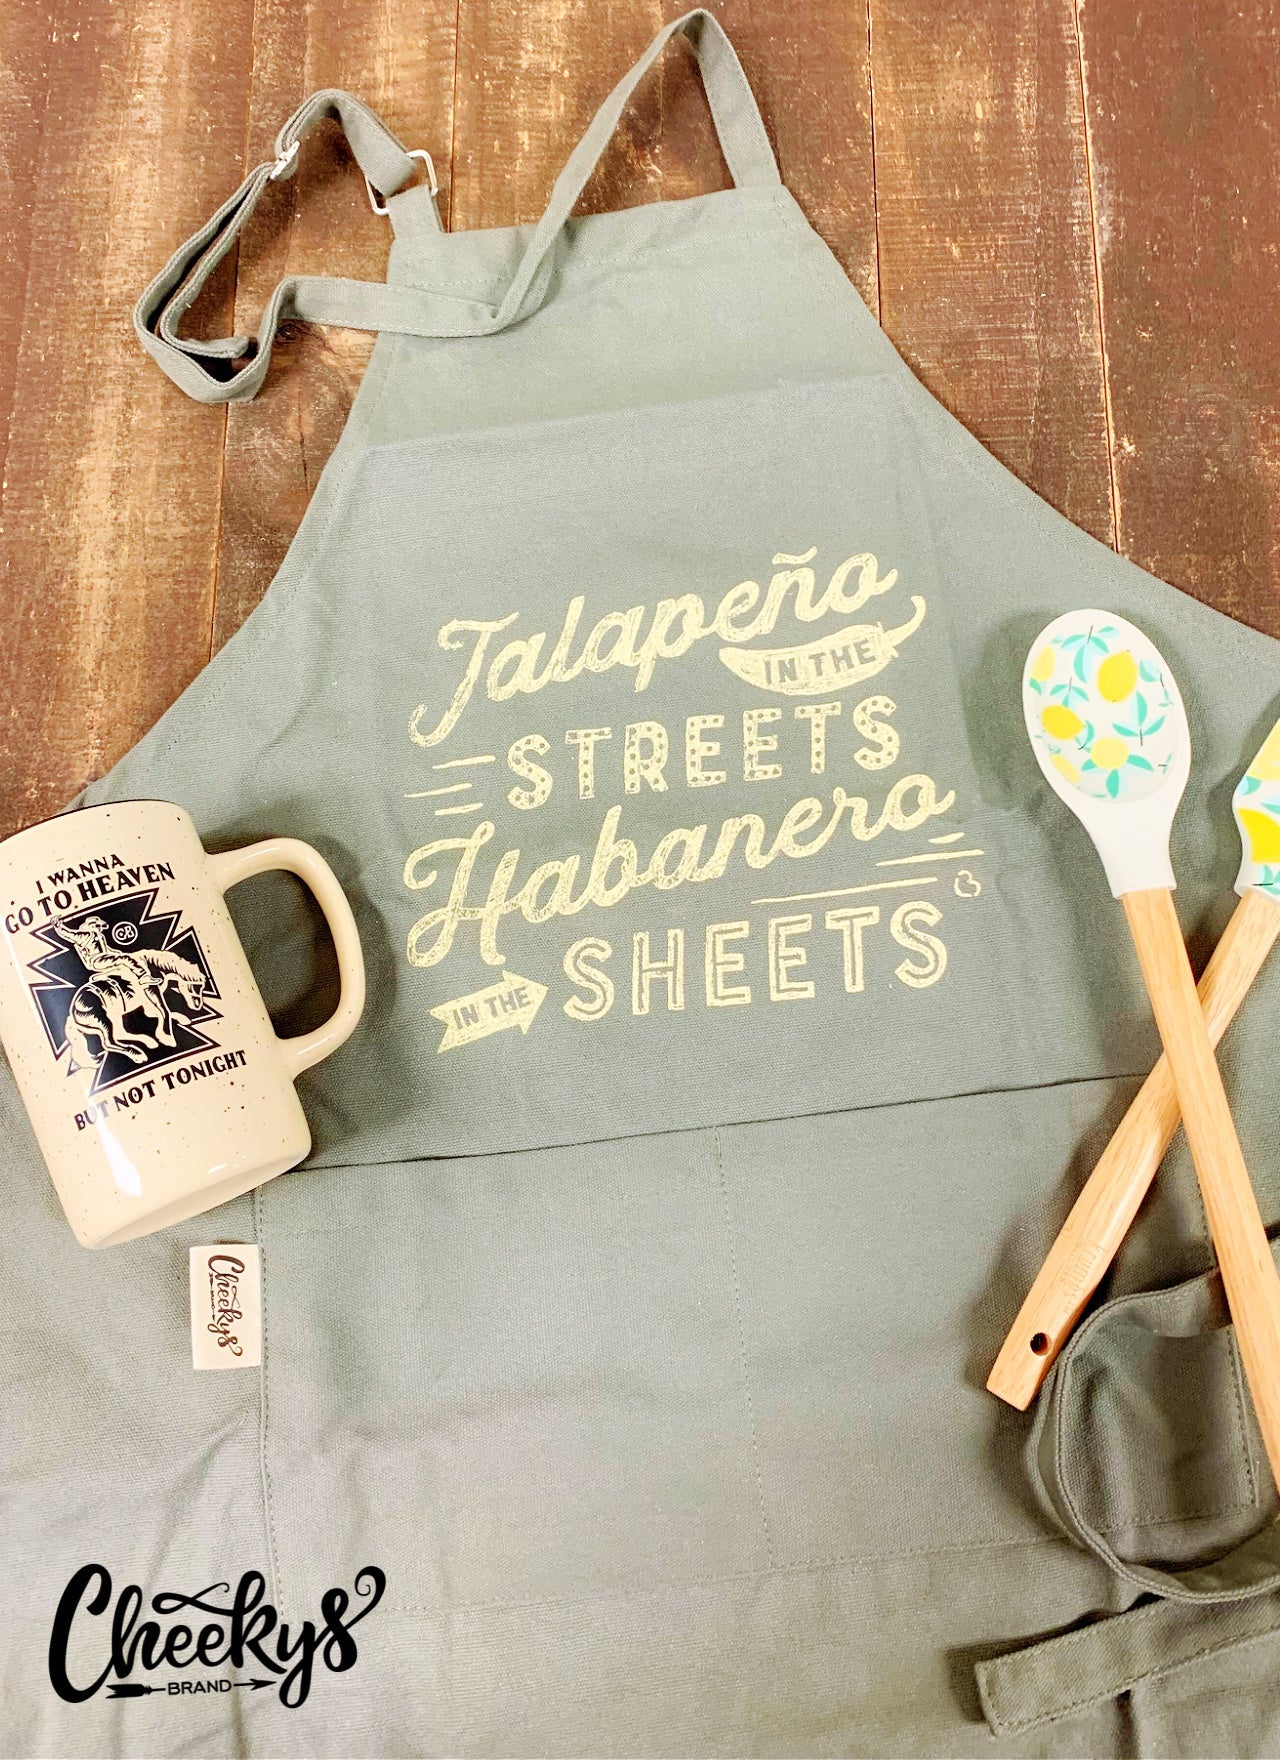 Jalapeno in the Streets Habanero in the Sheet Apron on Army Green Home & Gift Cheekys Brand 